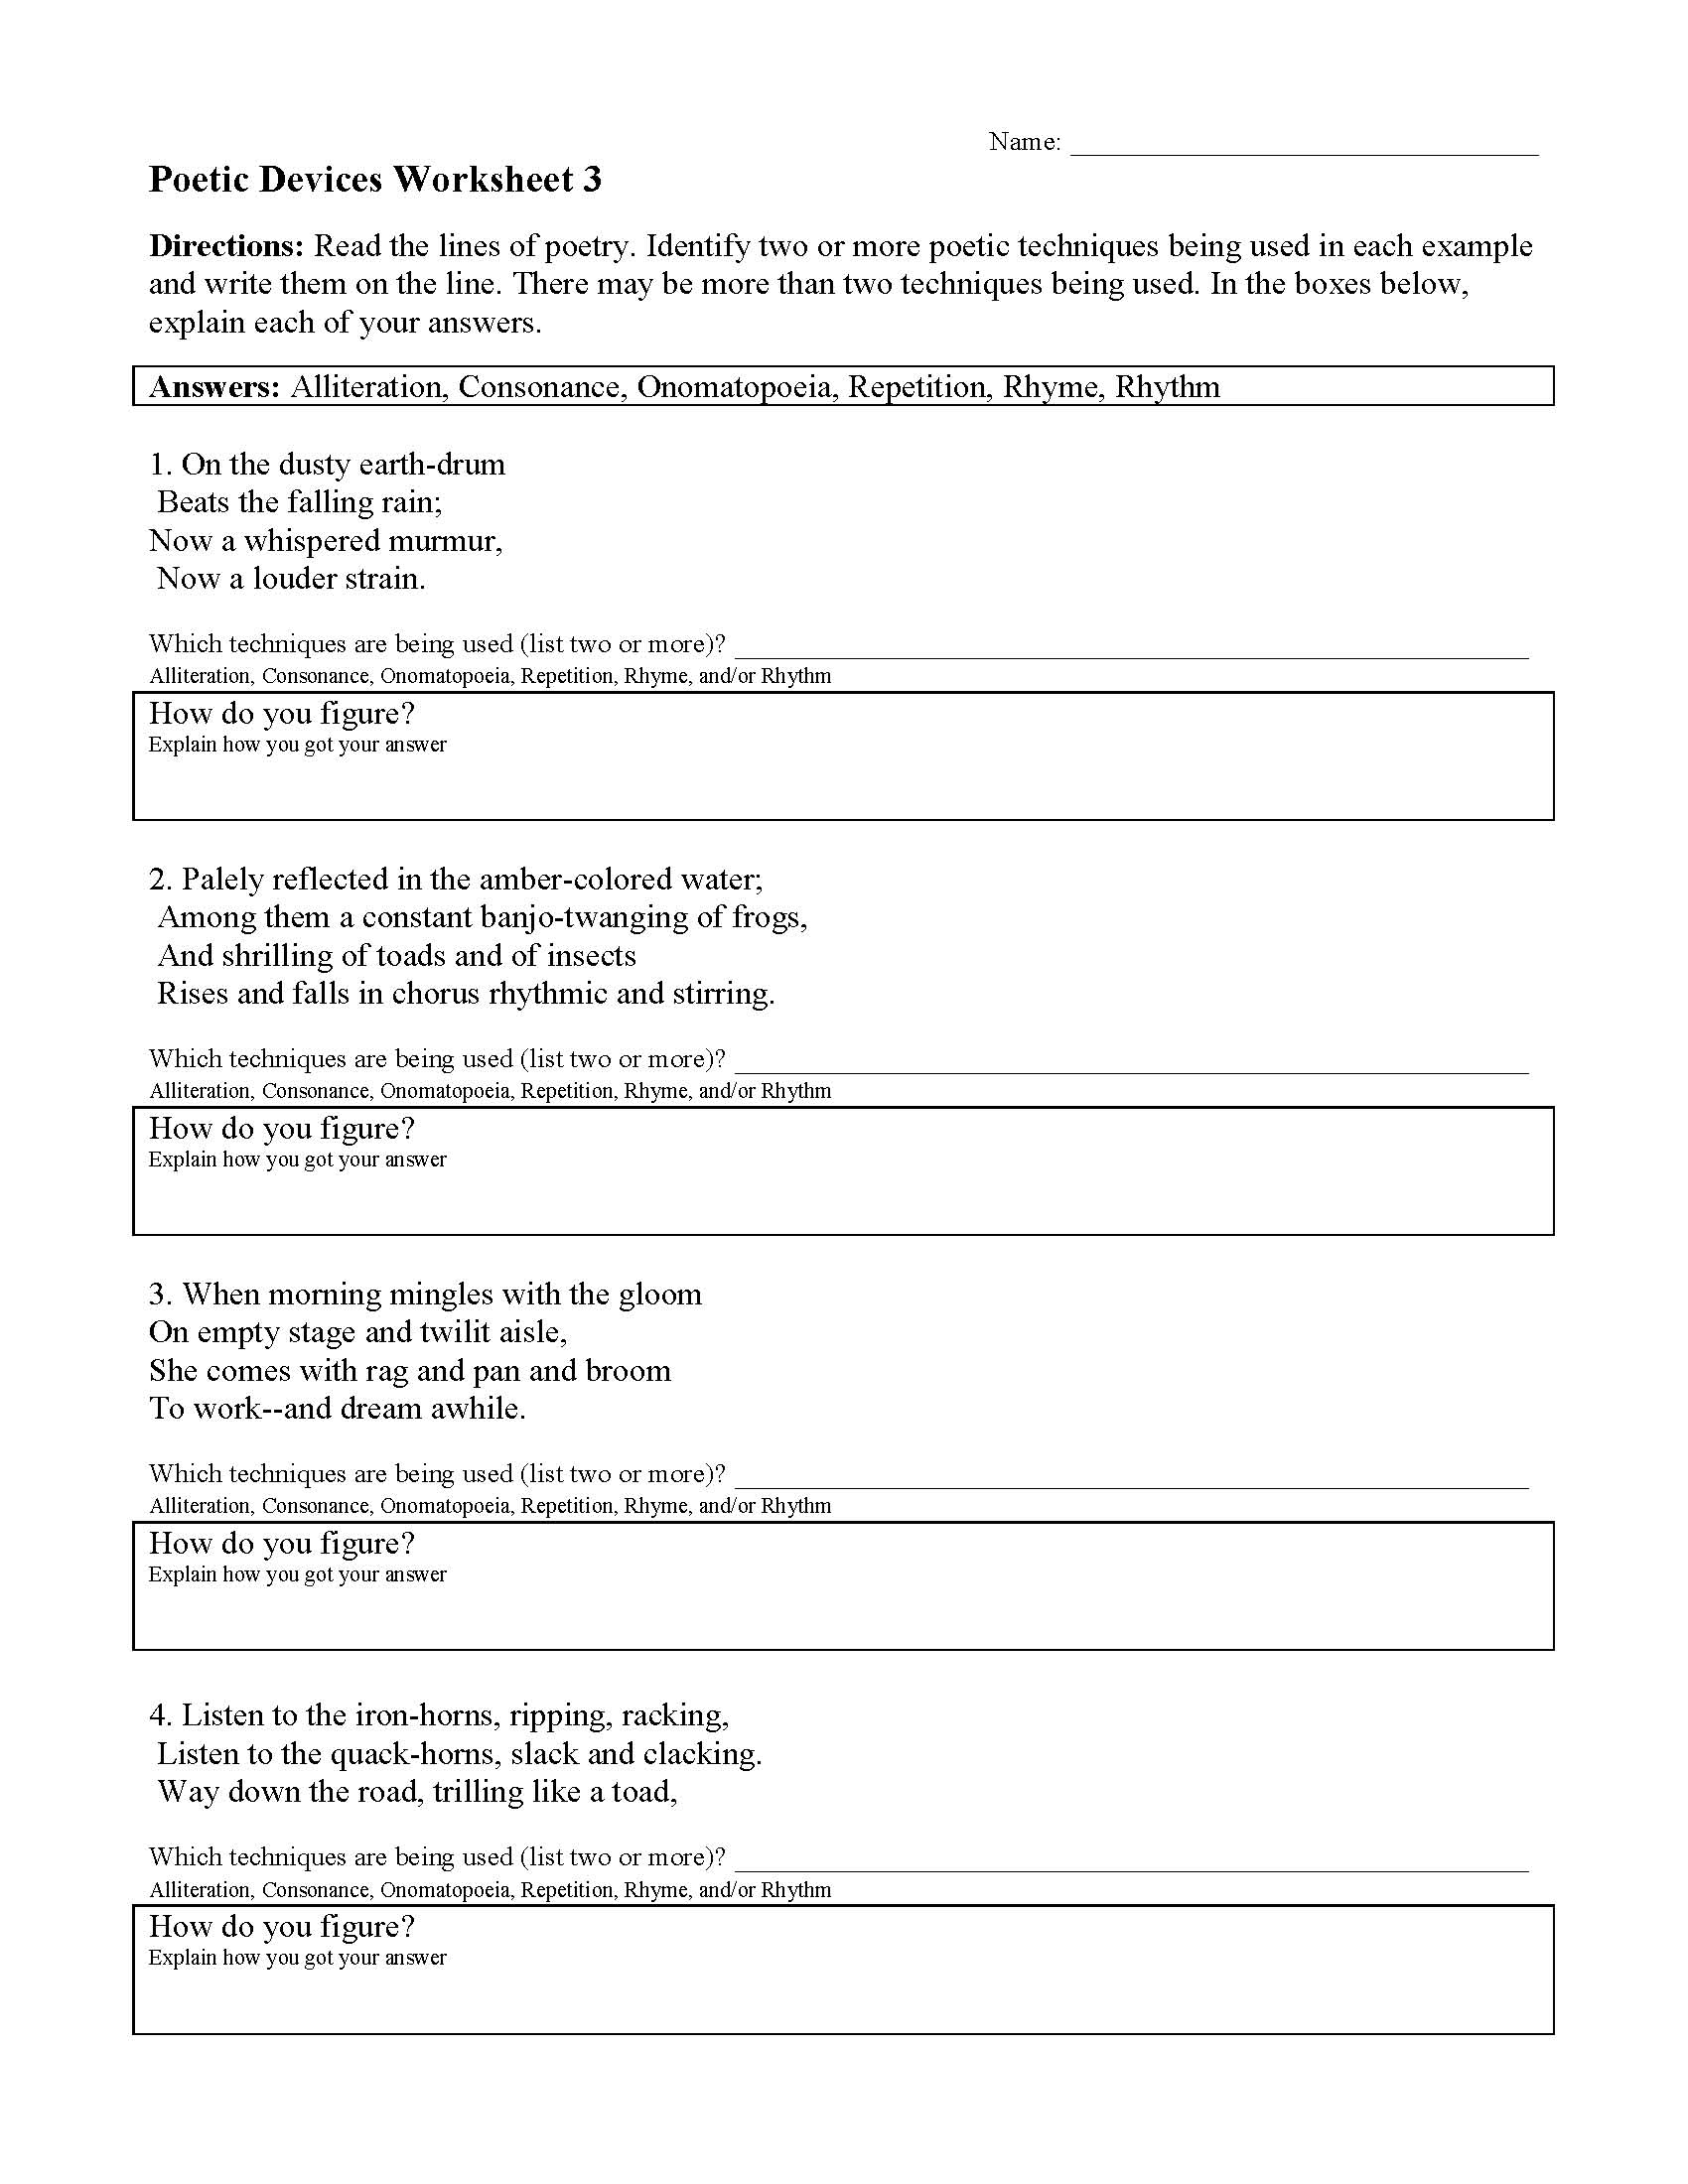 Literary Devices Practice Worksheet